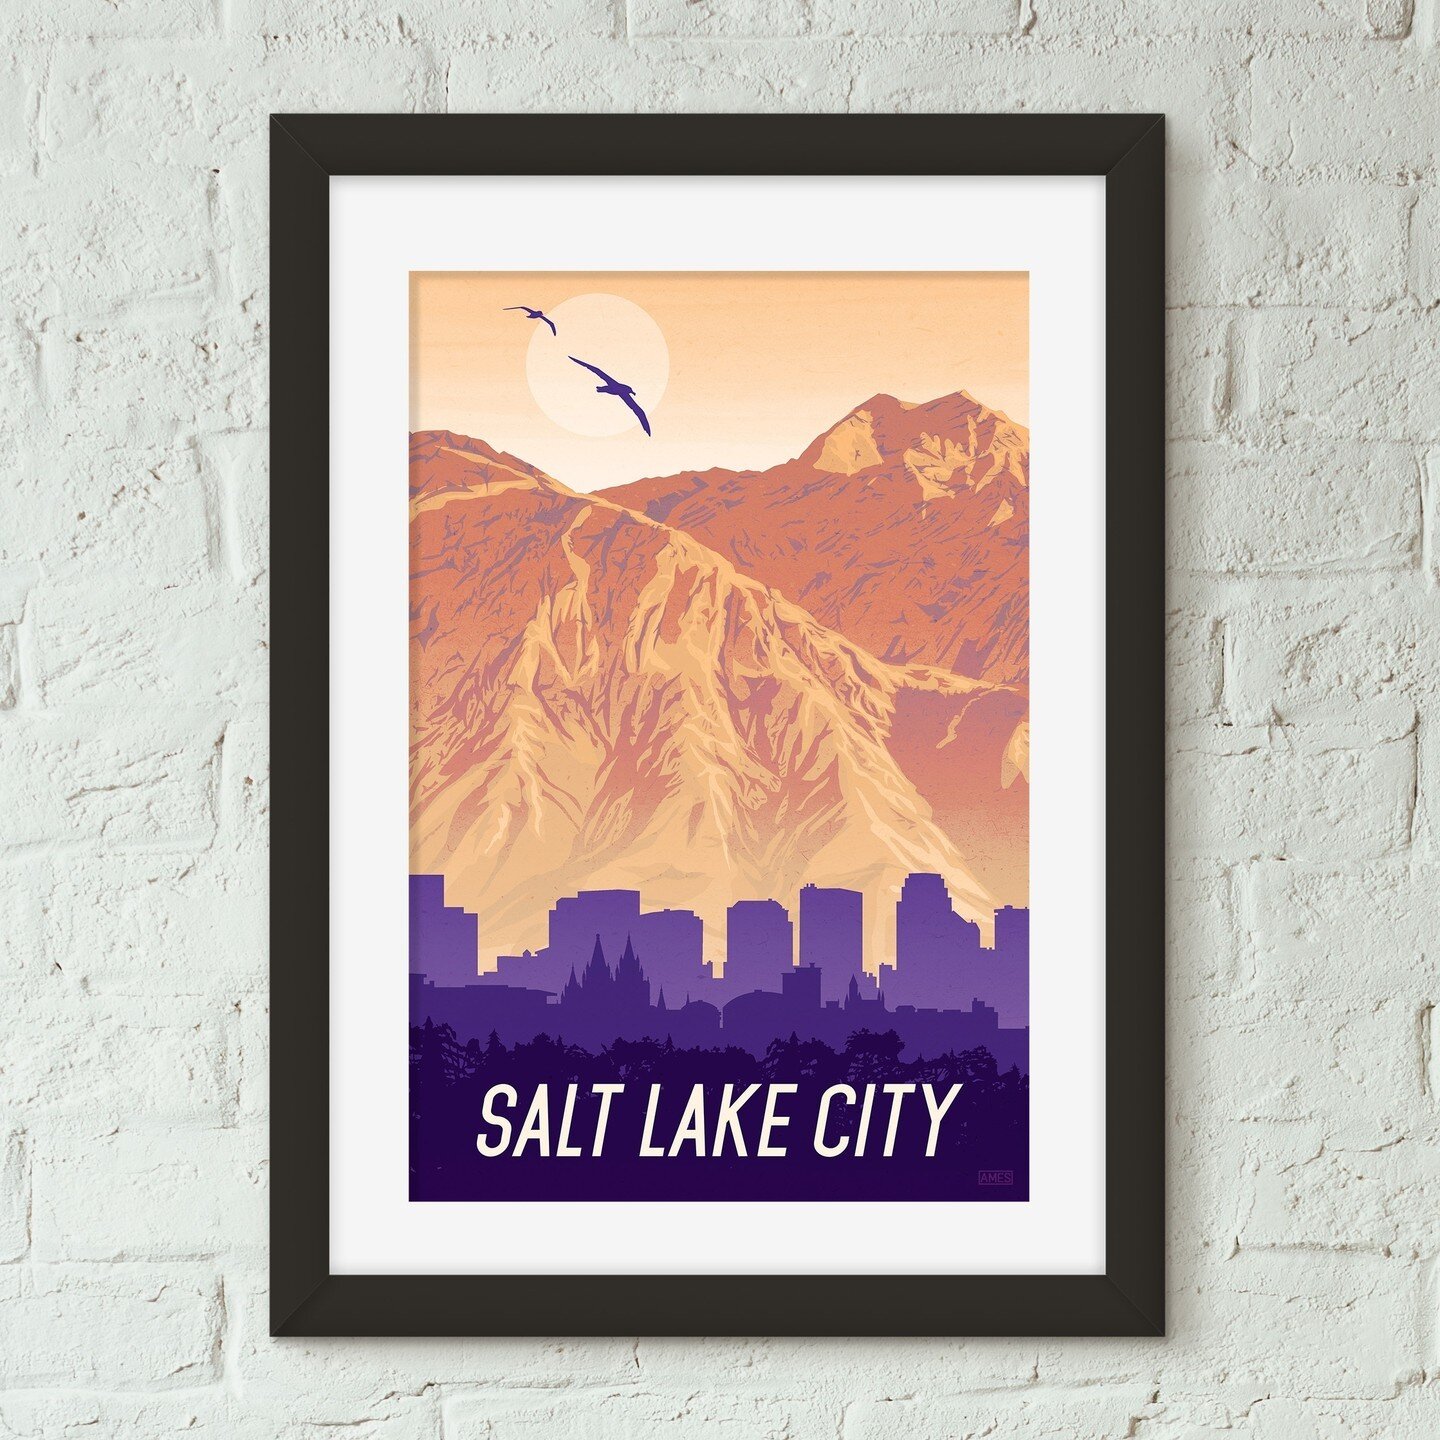 I sometimes feel like I can either manage my social media or create new work - I can't really seem do both at the same time. ⁠
⁠
Anyway, the last 6 months I've been working on a ton of new stuff and it's all Utah themed :) Here is the first peek!⁠
⁠
